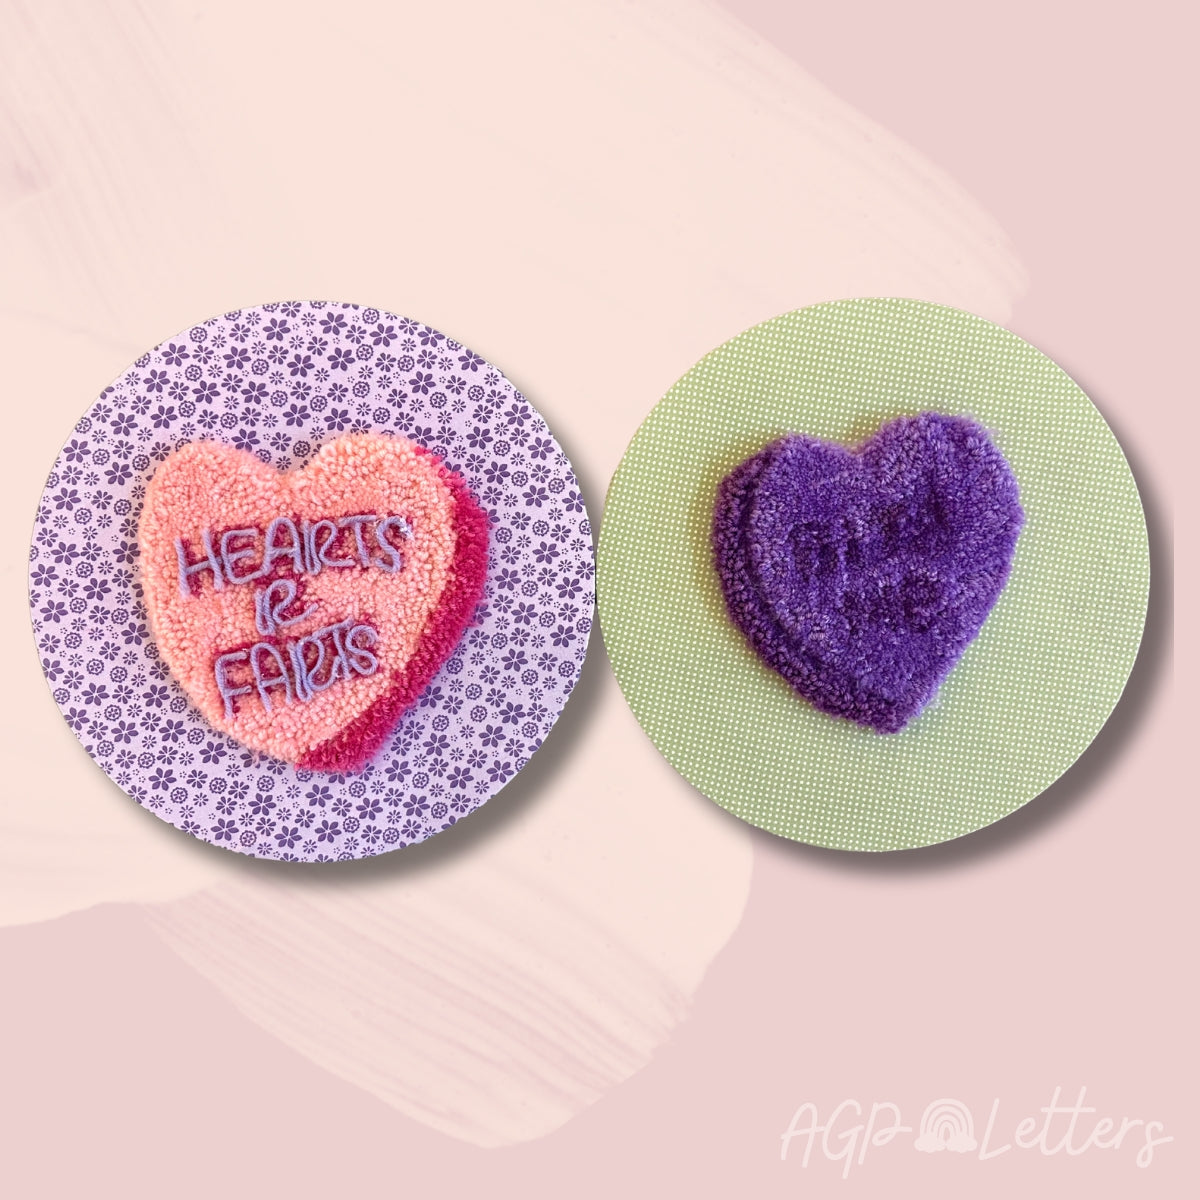 Candy Heart Punch Needle Canvas